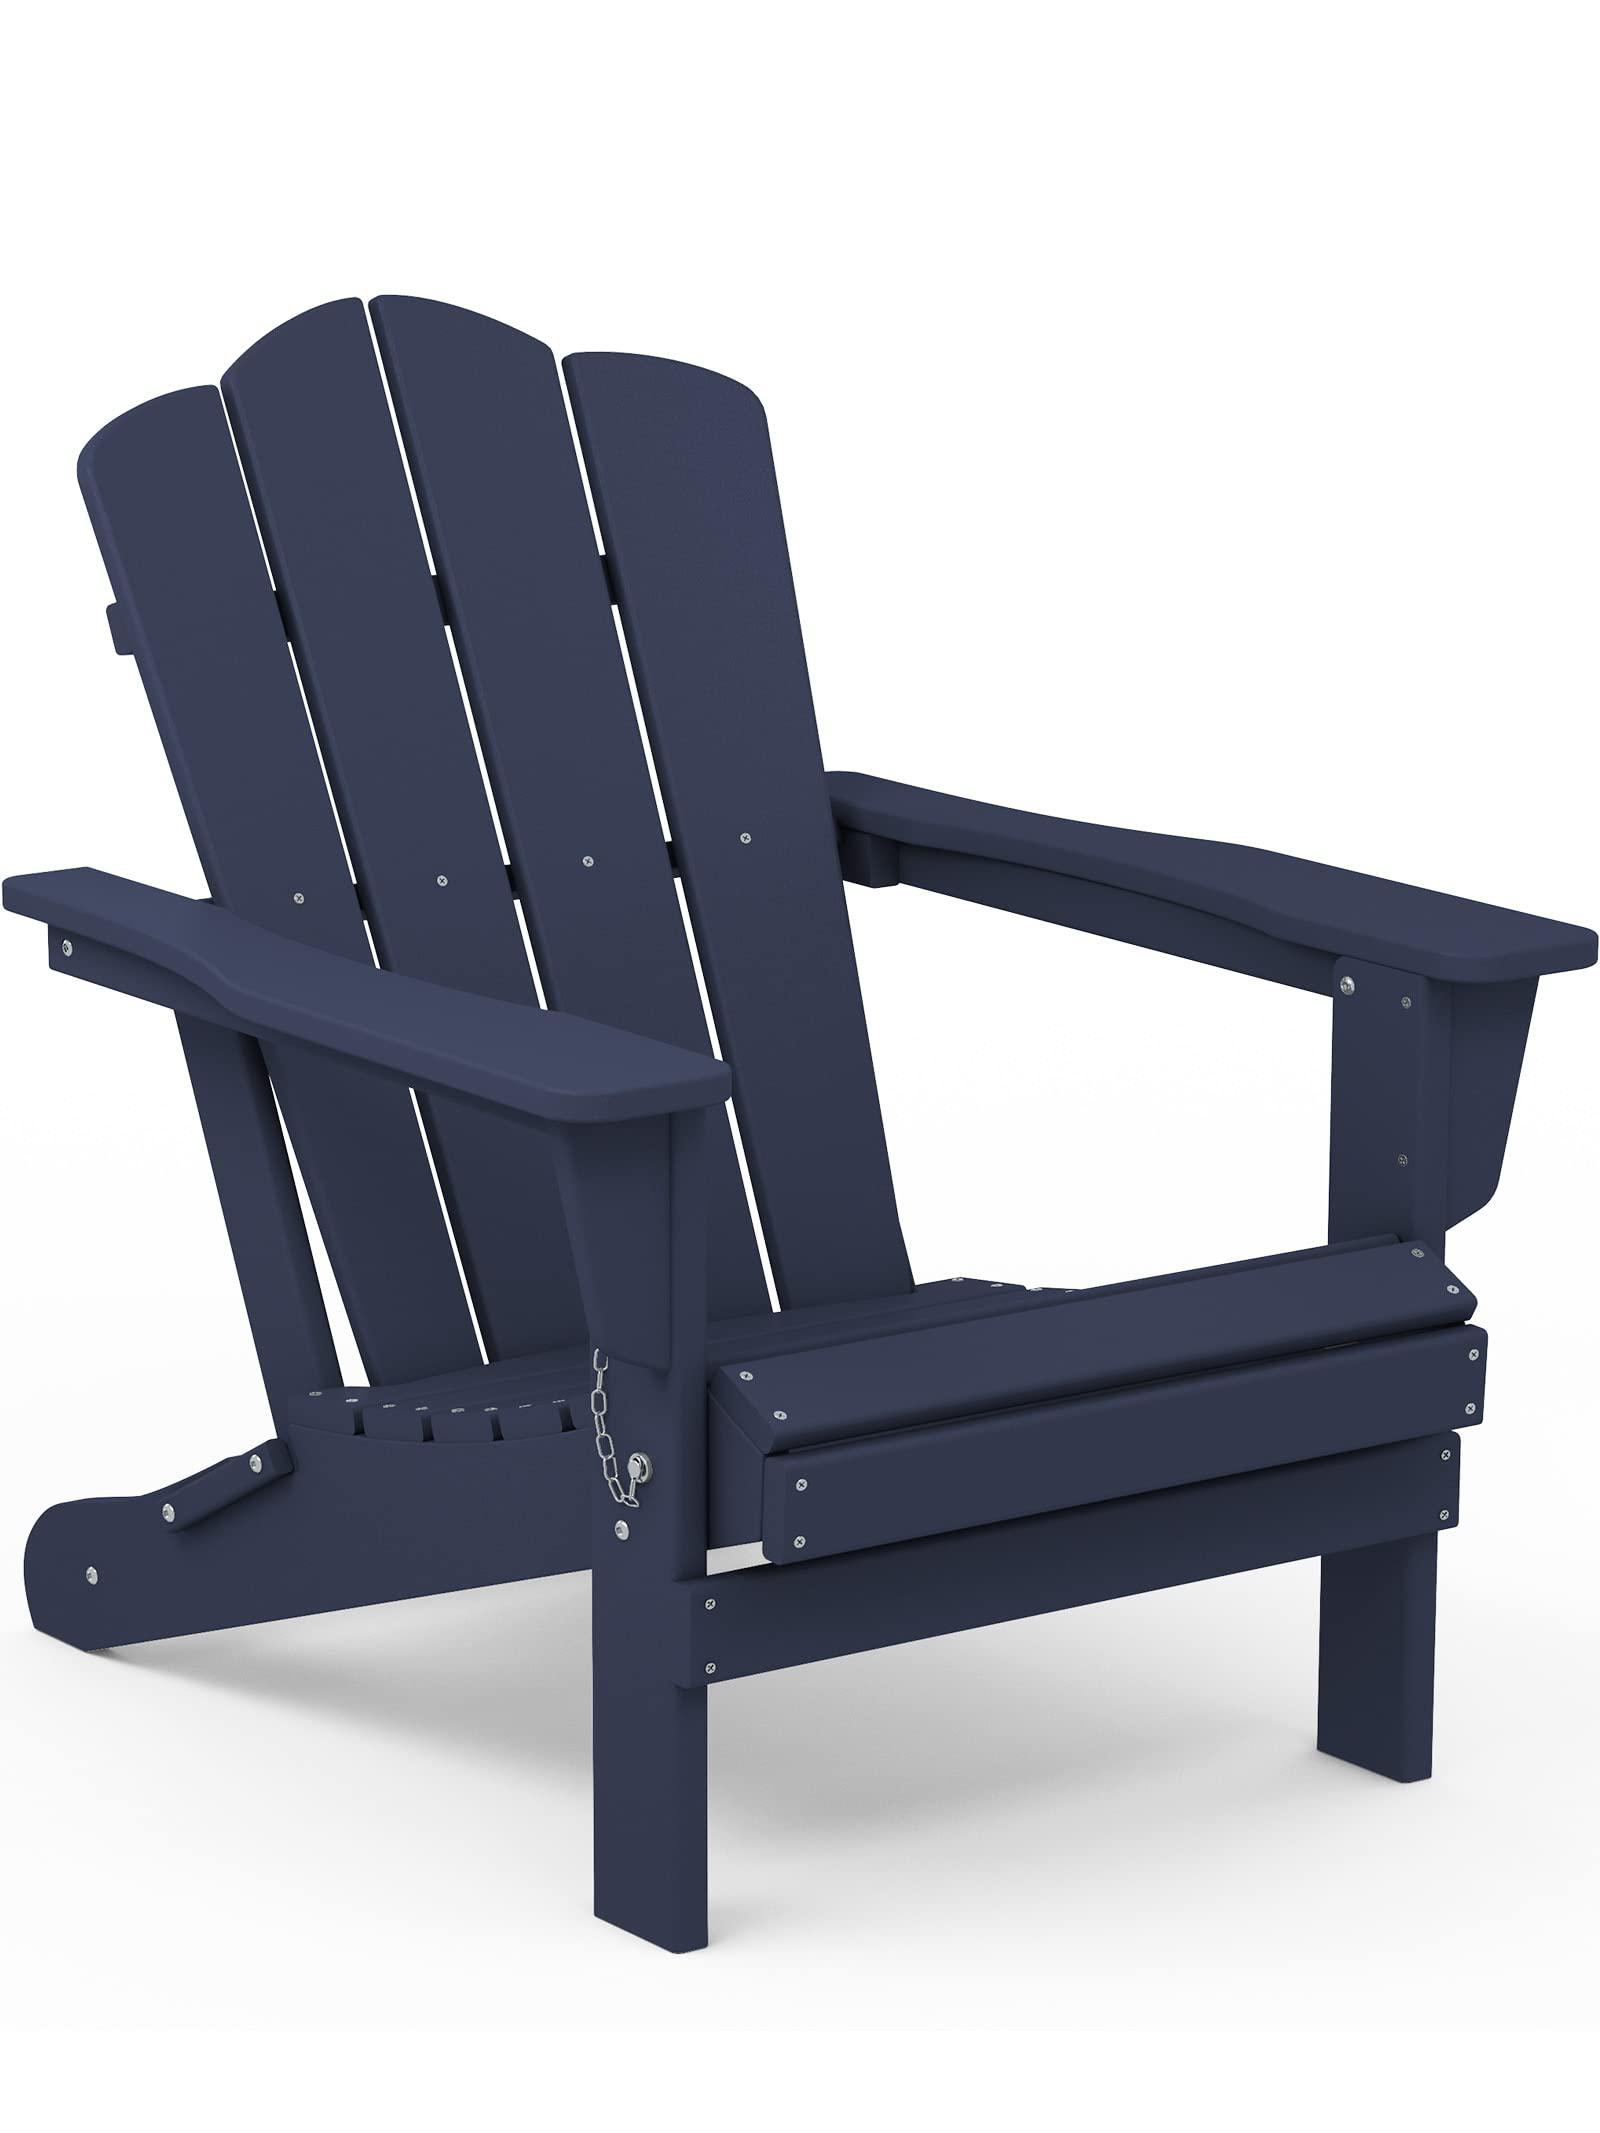 kingyes folding adirondack chair, relaxing stackable|arm rest|ergonomic hdpe all-weather adirondack chair, navy